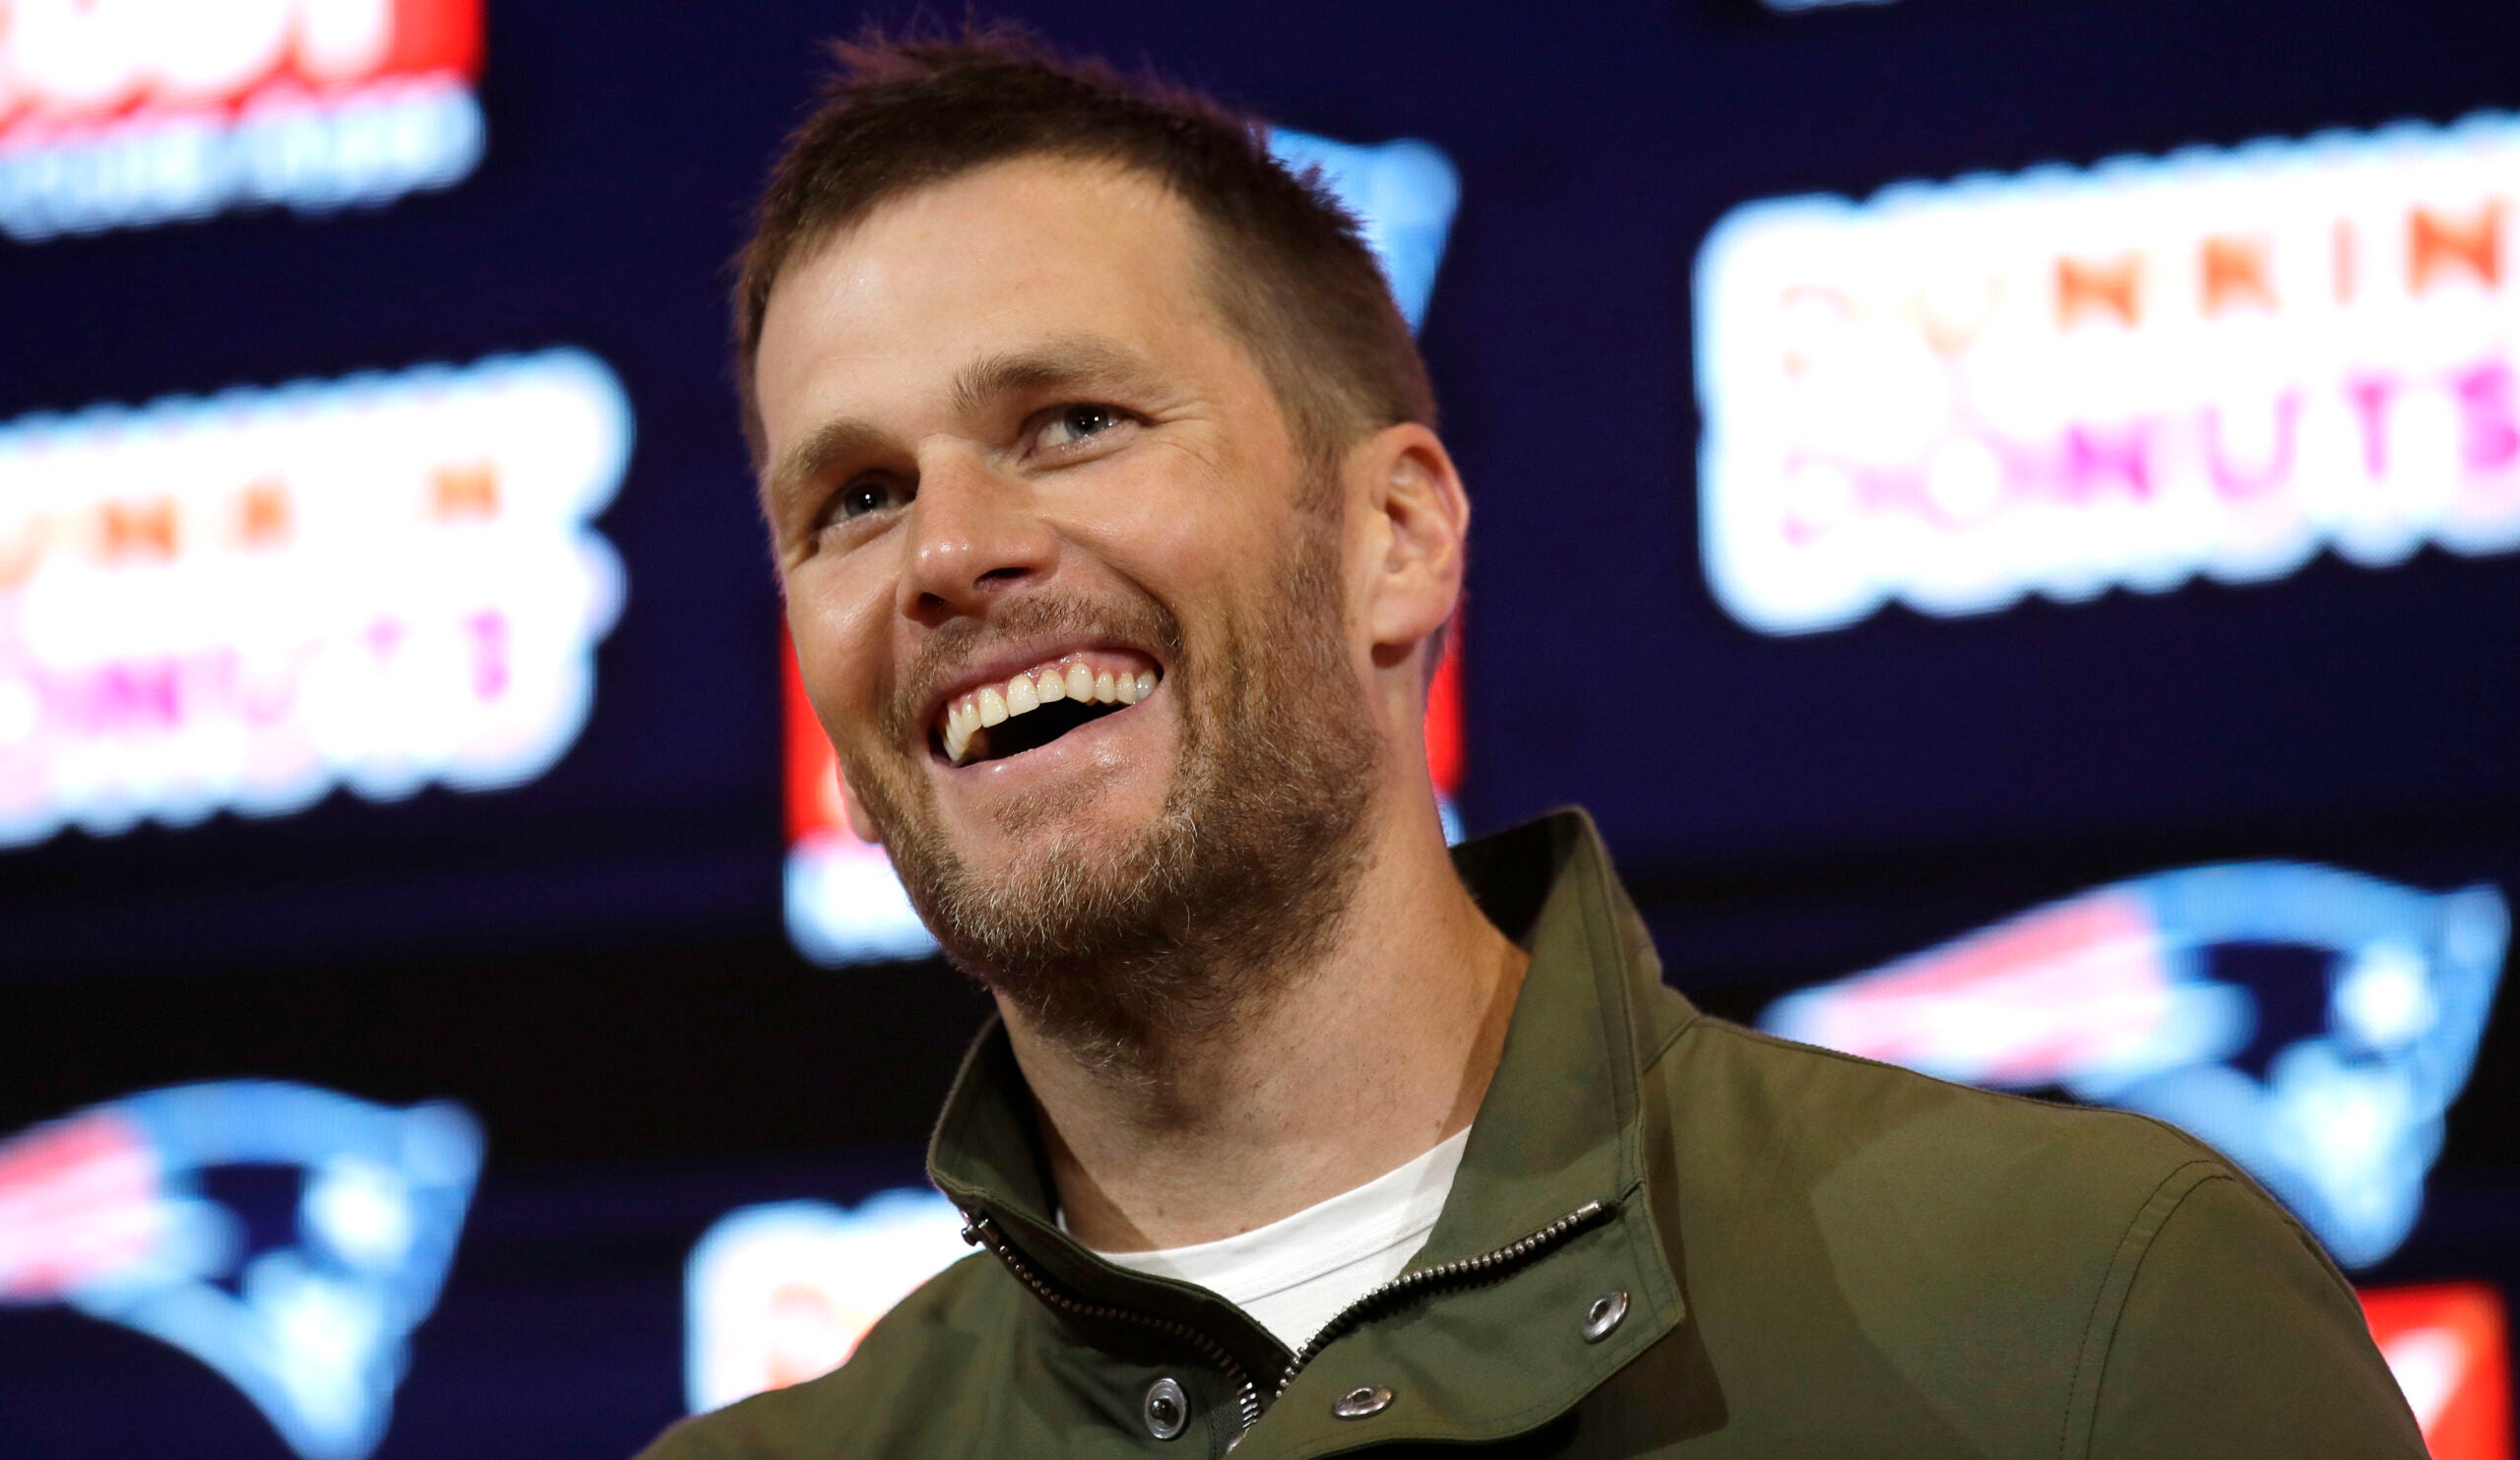 Boston Red Sox: what did the team look like before Tom Brady